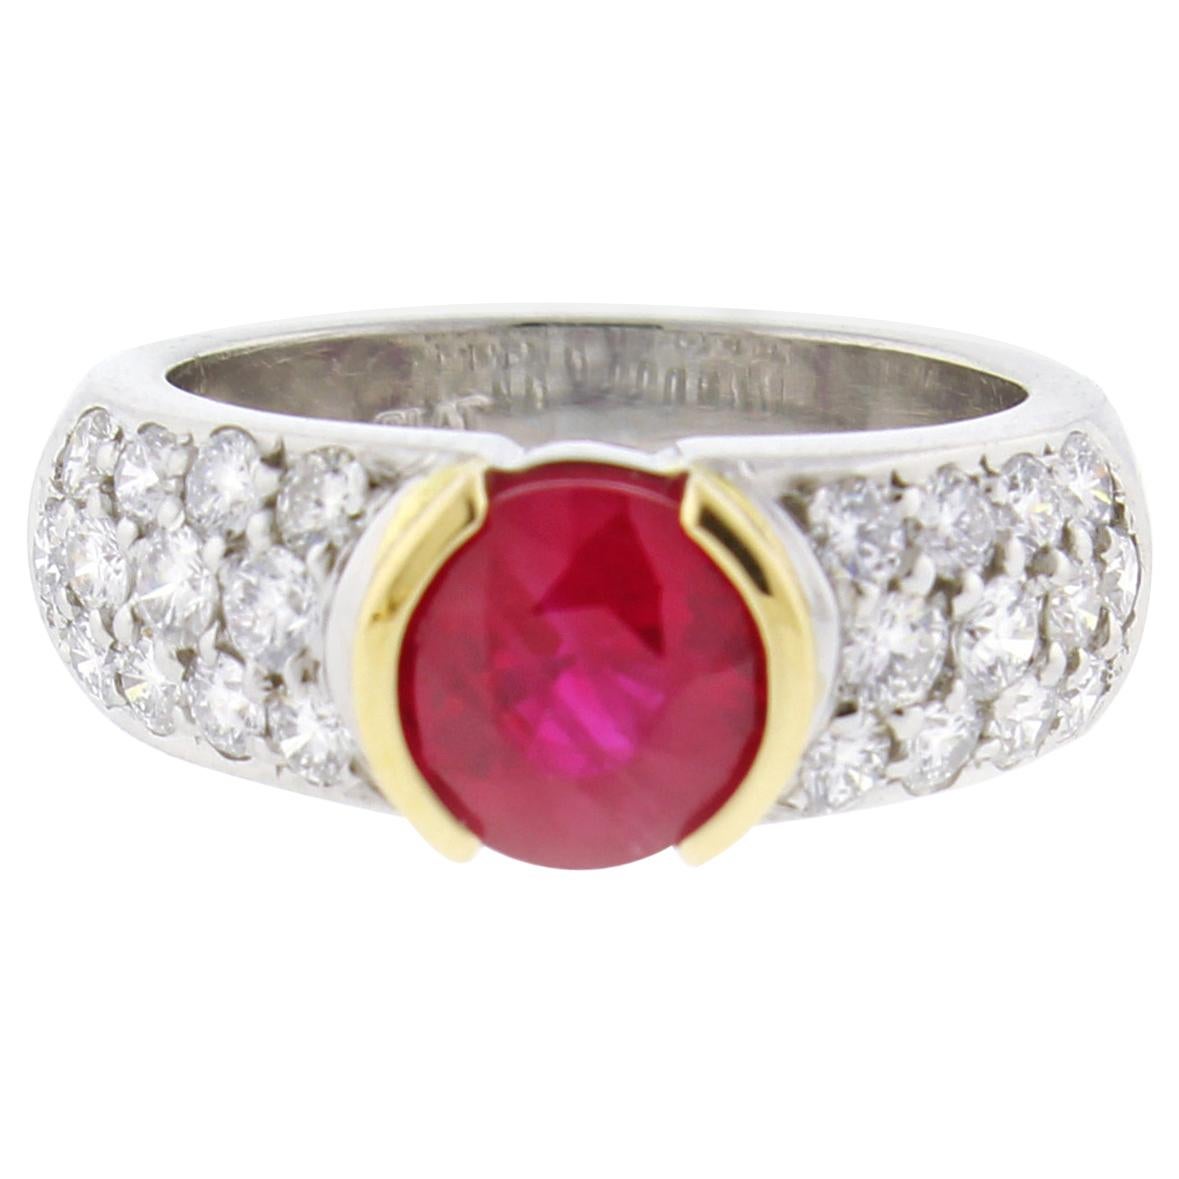 Burma Ruby and Diamond Ring by Pampillonia